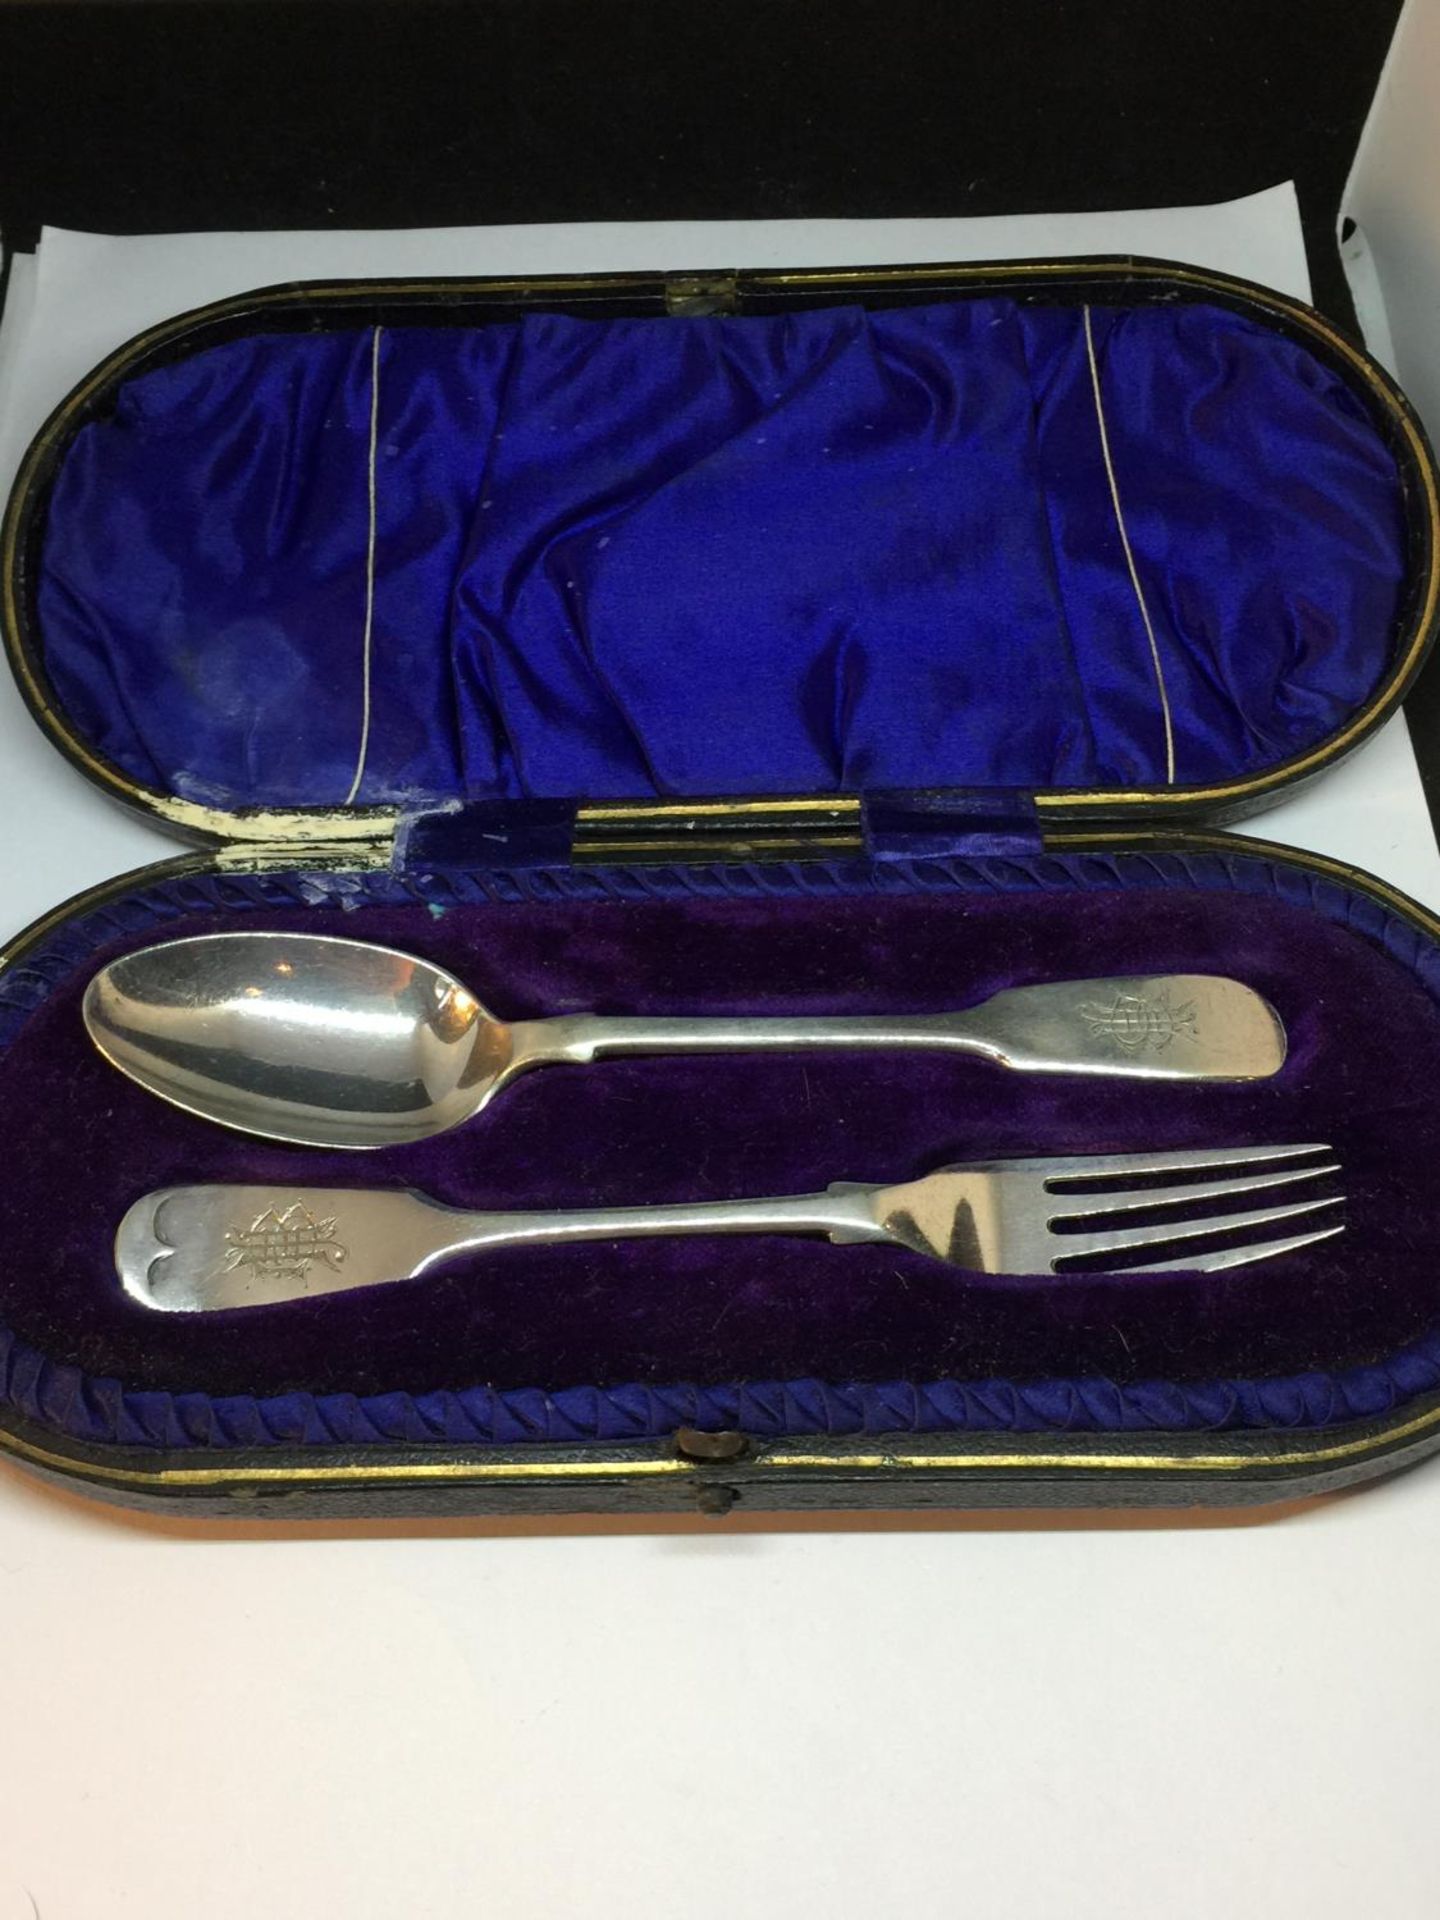 A HALLMARKED SHEFFIELD SILVER FORK AND SPOON SET IN A PRESENTATION BOX